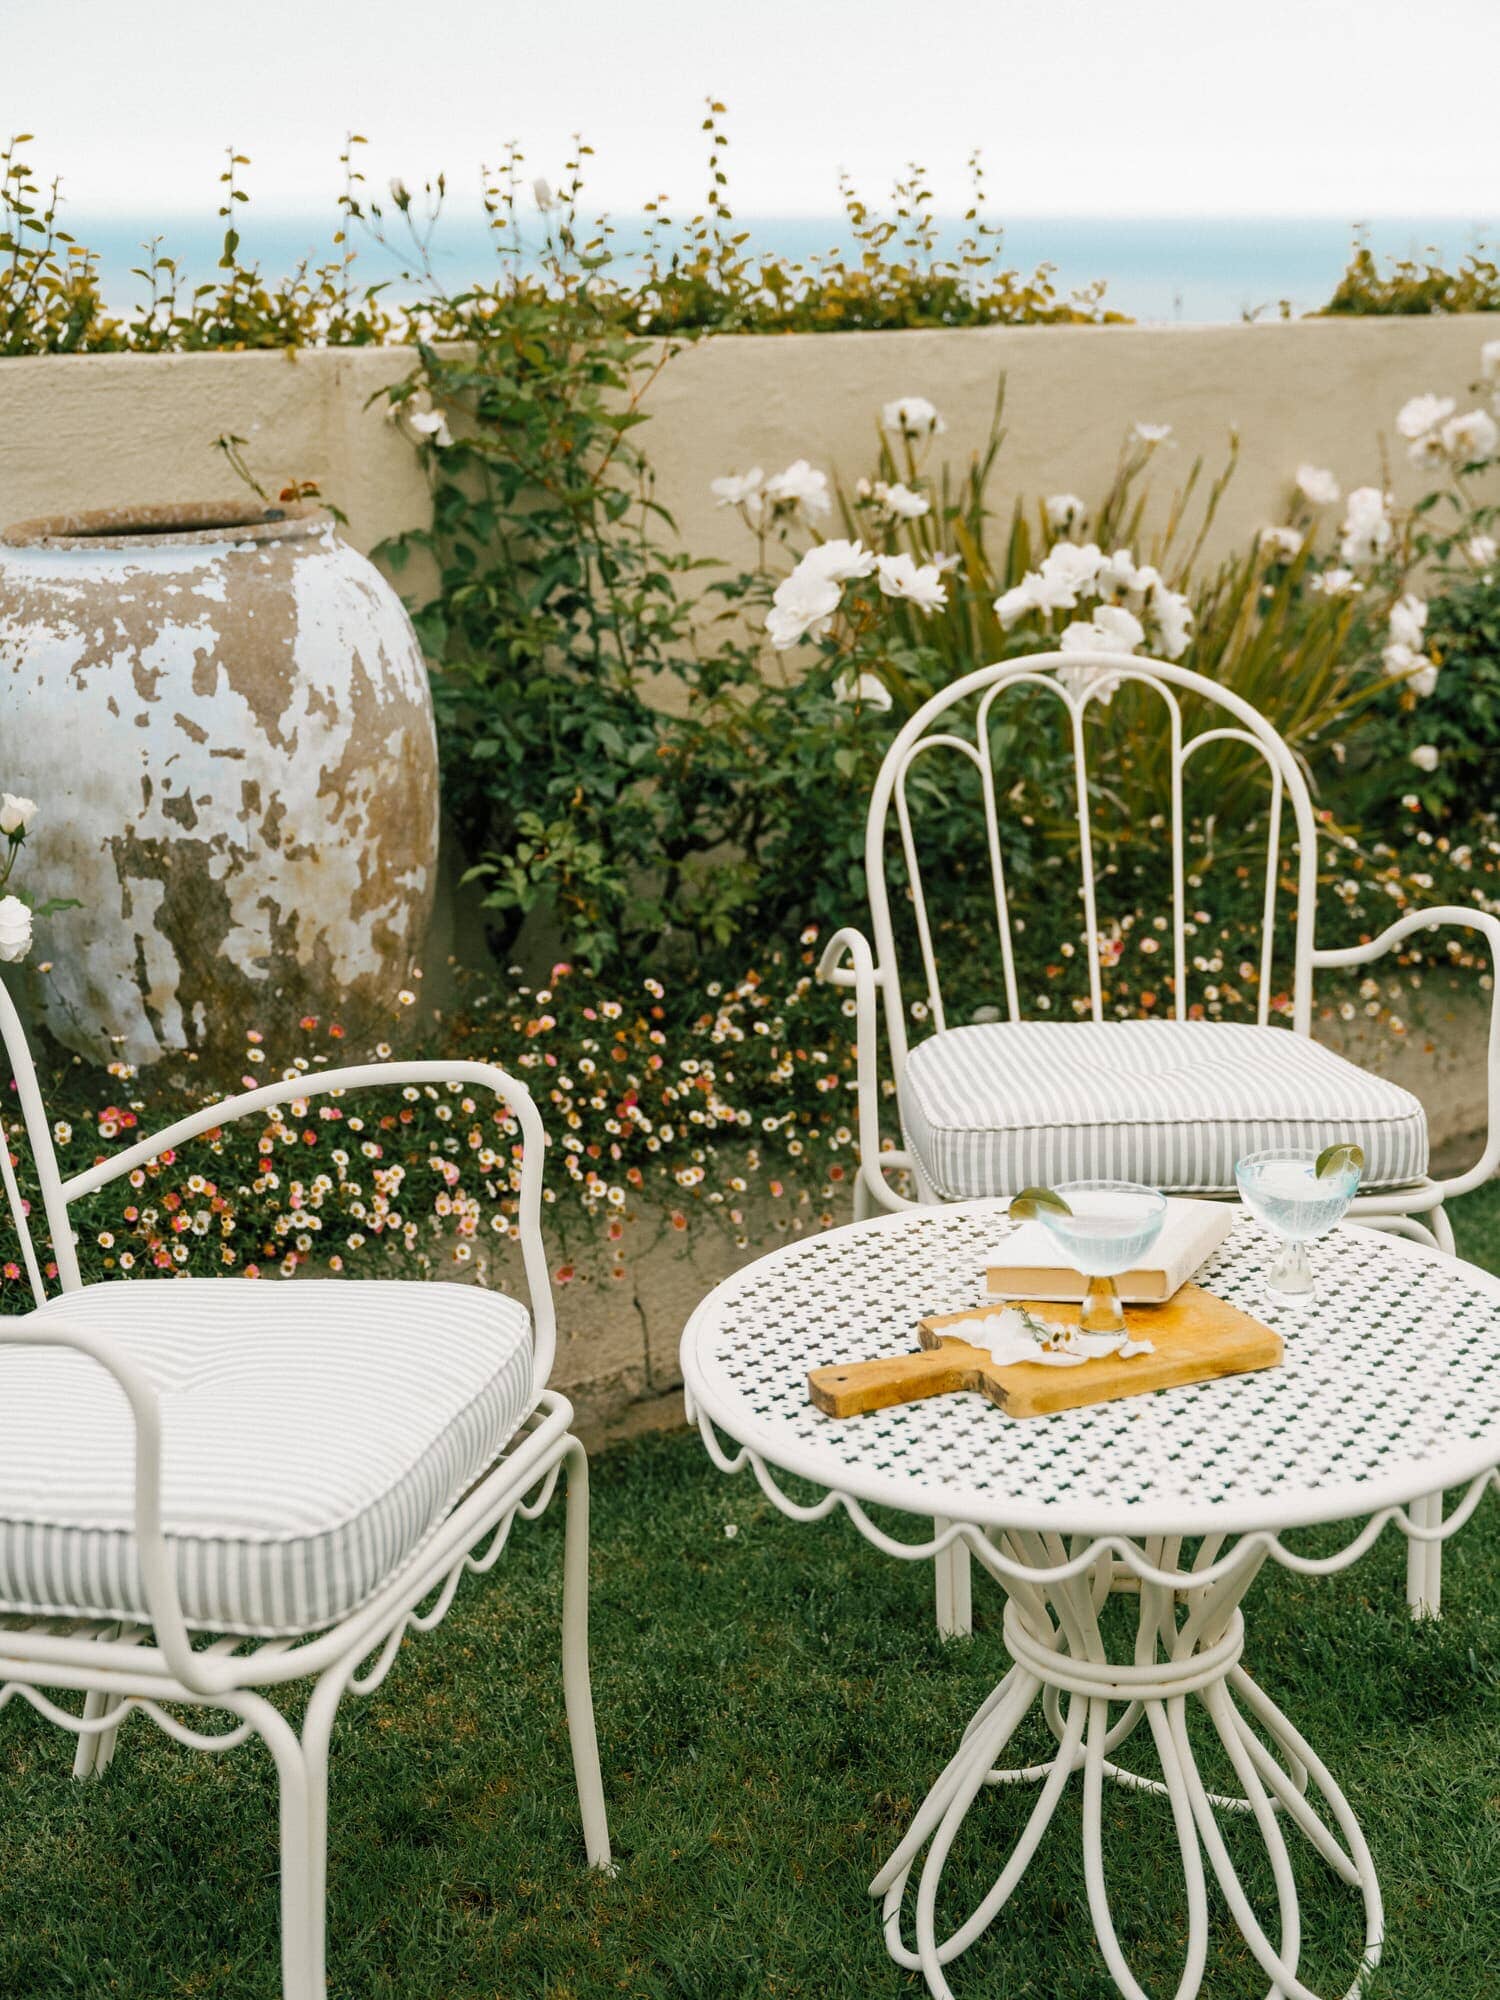 White al fresco chairs and side table in a garden